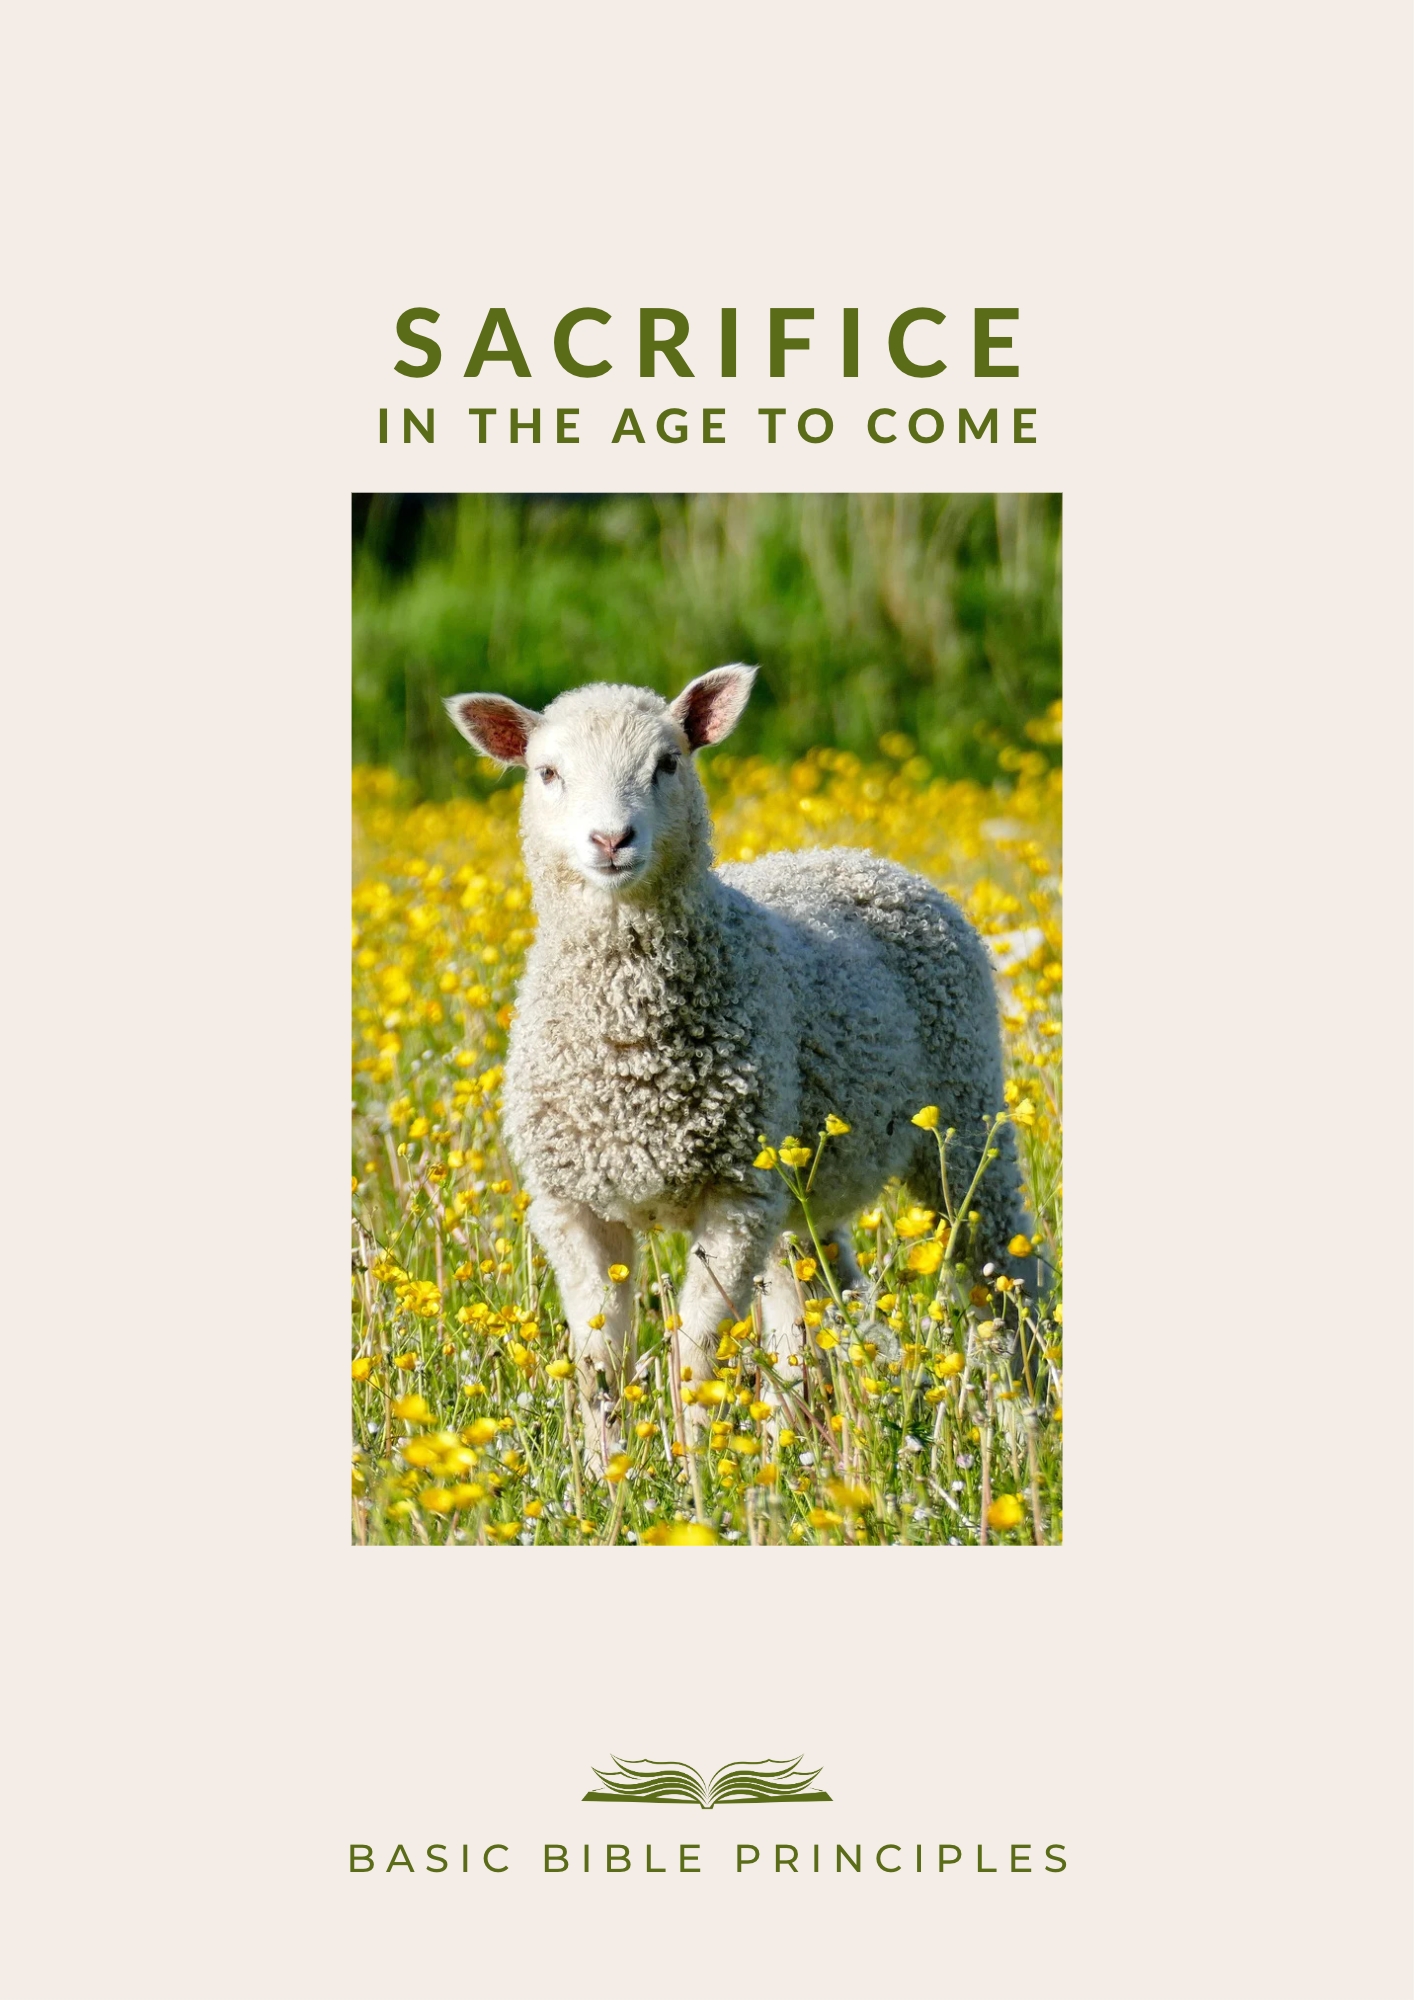 Basic Bible Principles: SACRIFICE IN THE AGE TO COME